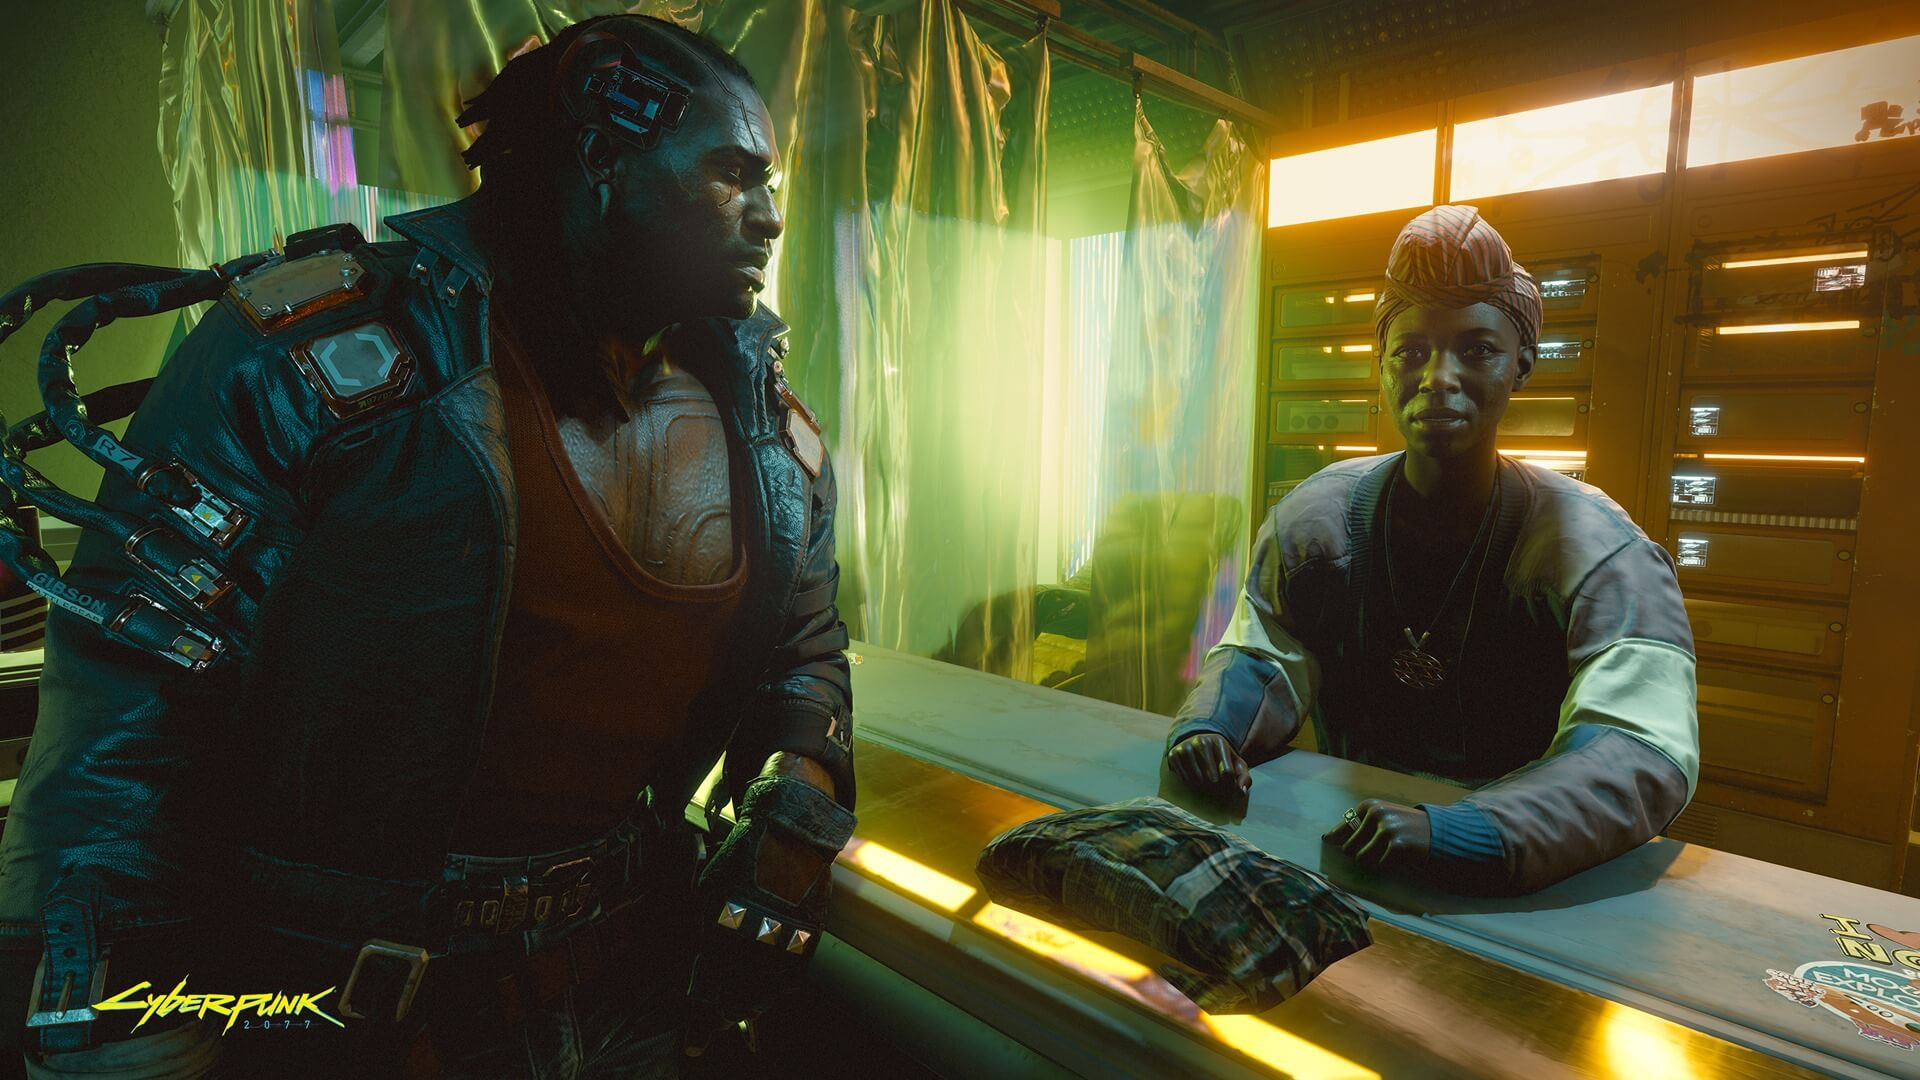 E3 2019 Cyberpunk 2077 Gameplay Demo Was on PC, Not PS4 Pro Push Square